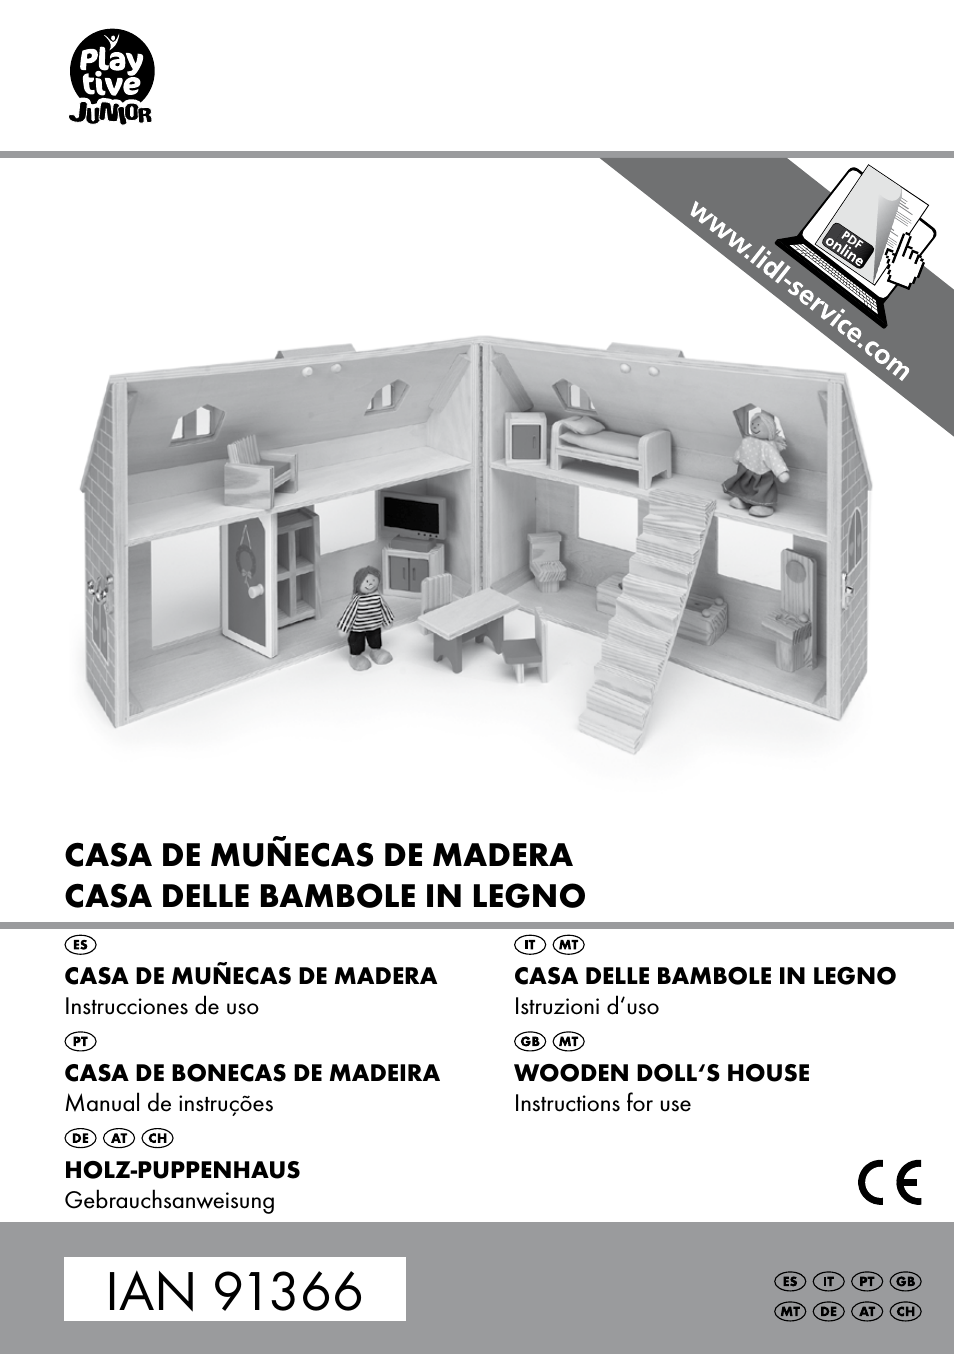 WOODEN DOLL‘S HOUSE